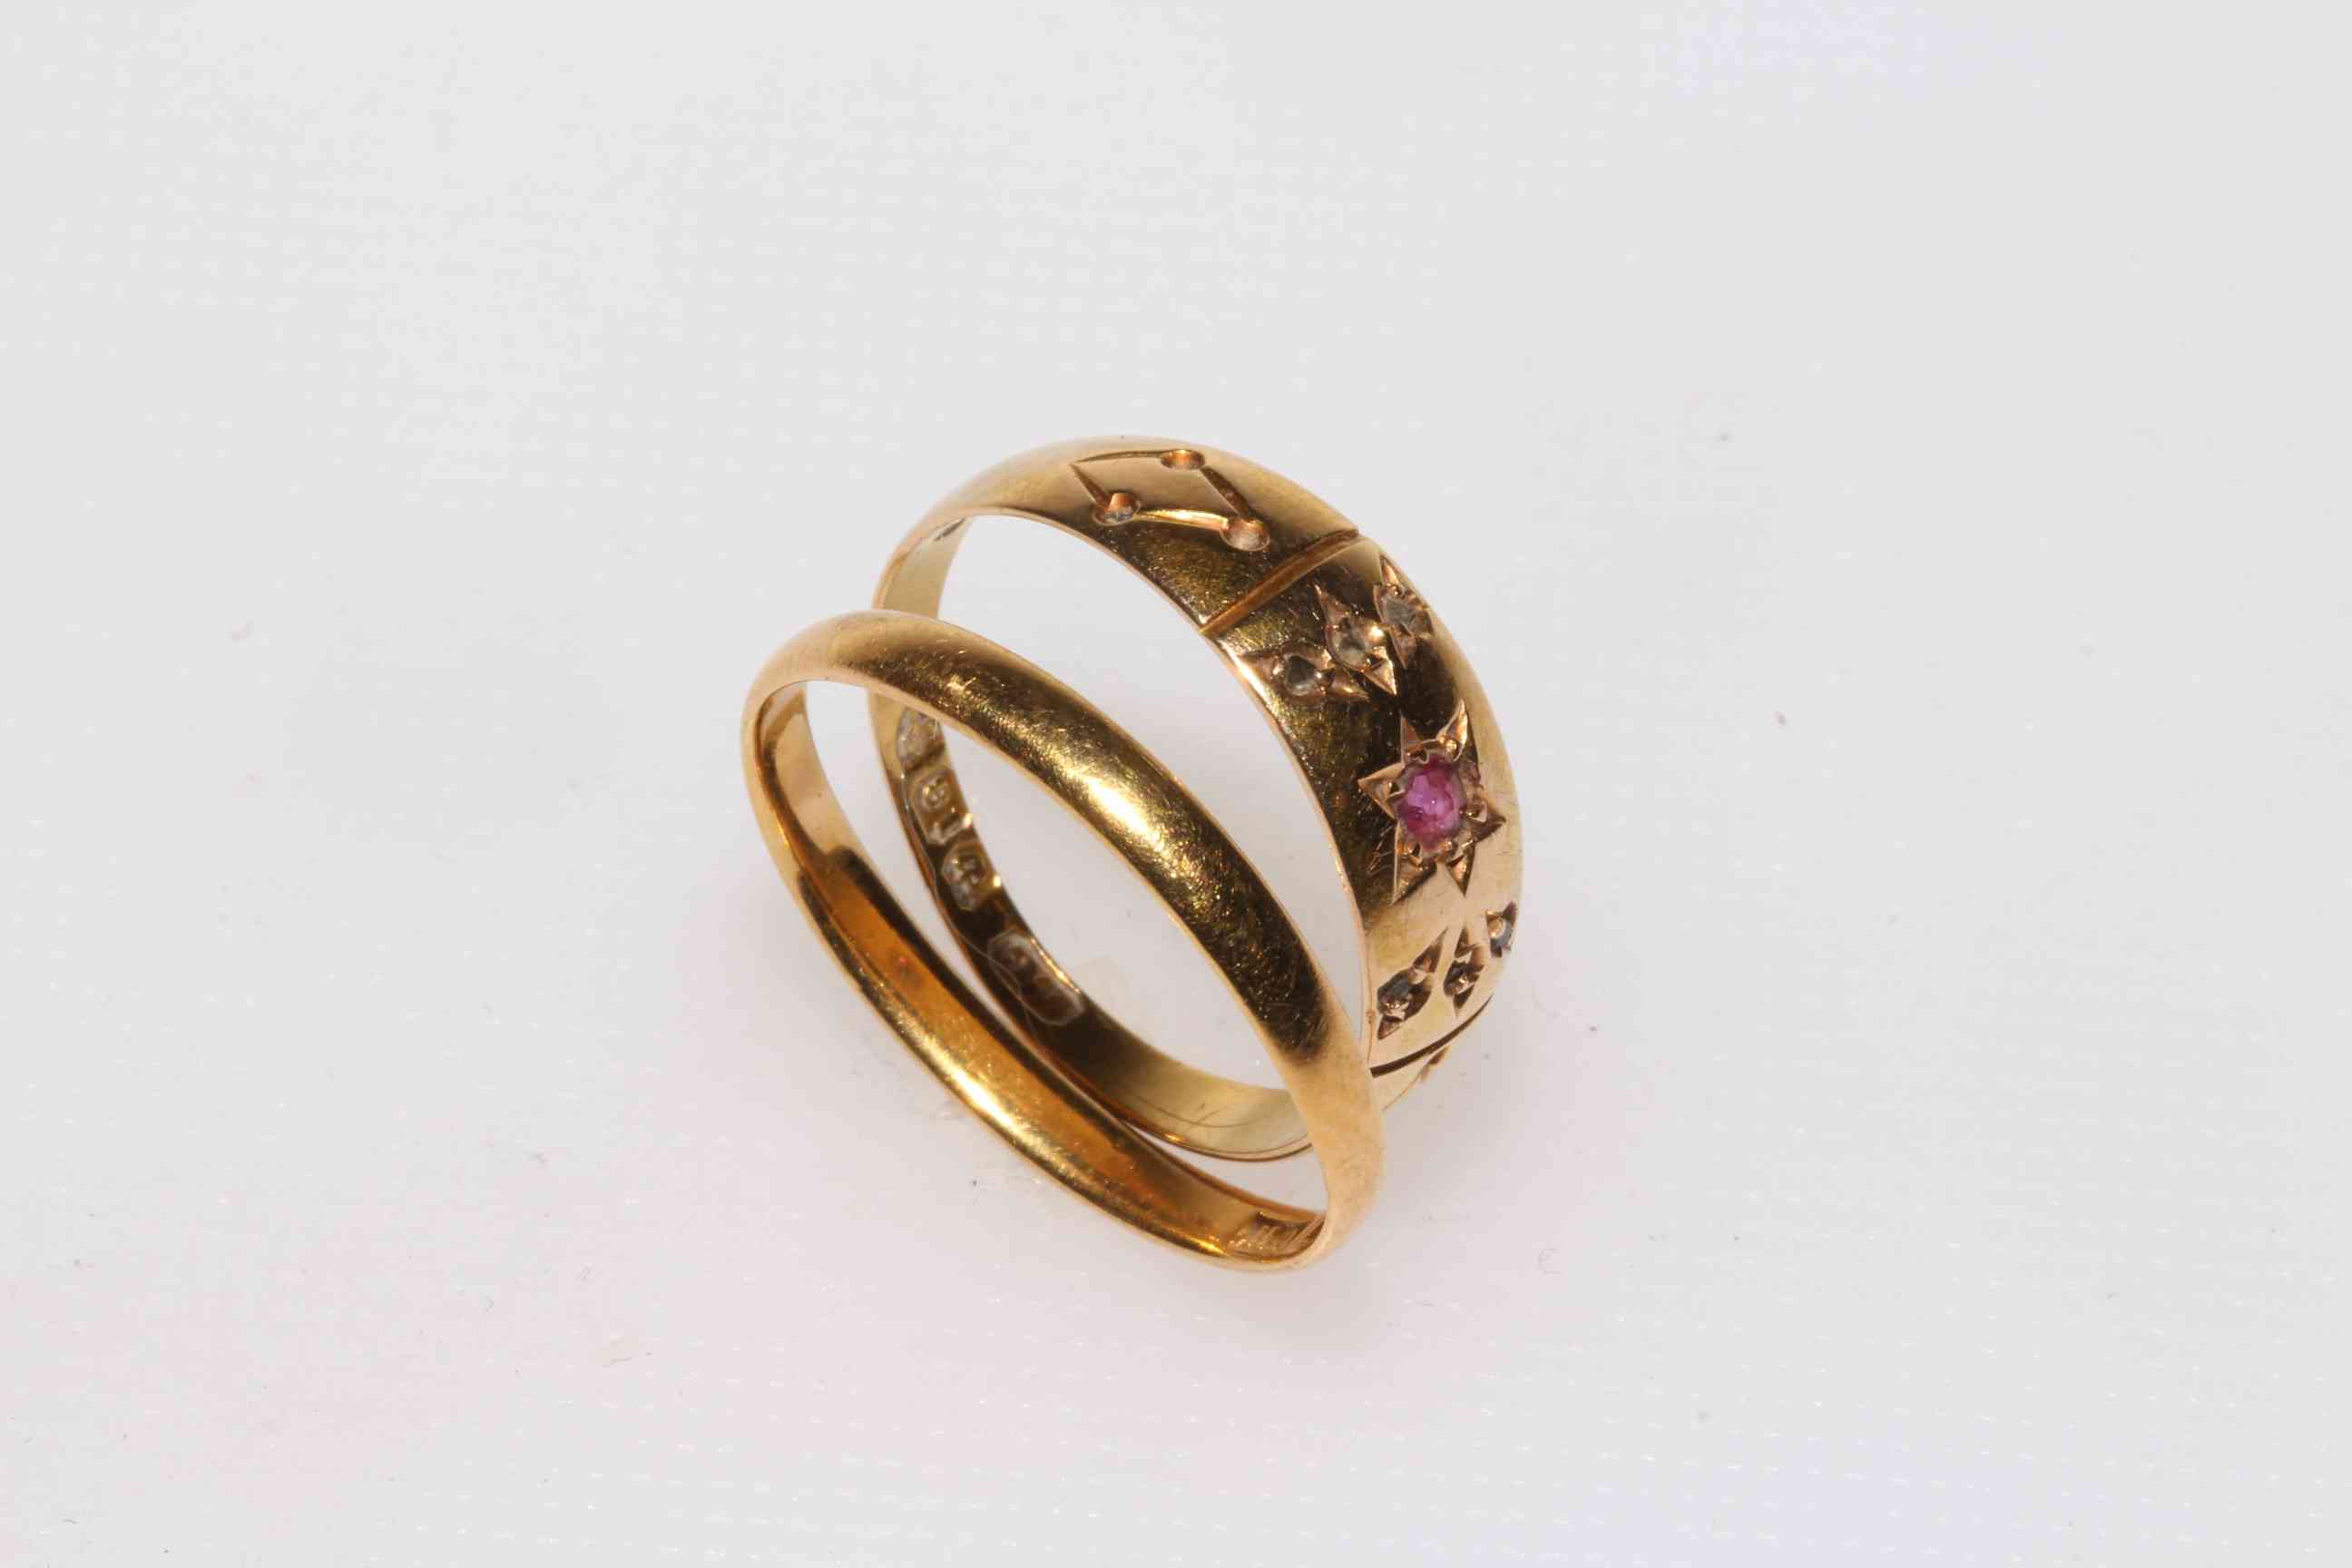 22ct gold band ring and 18ct gold ring (2)